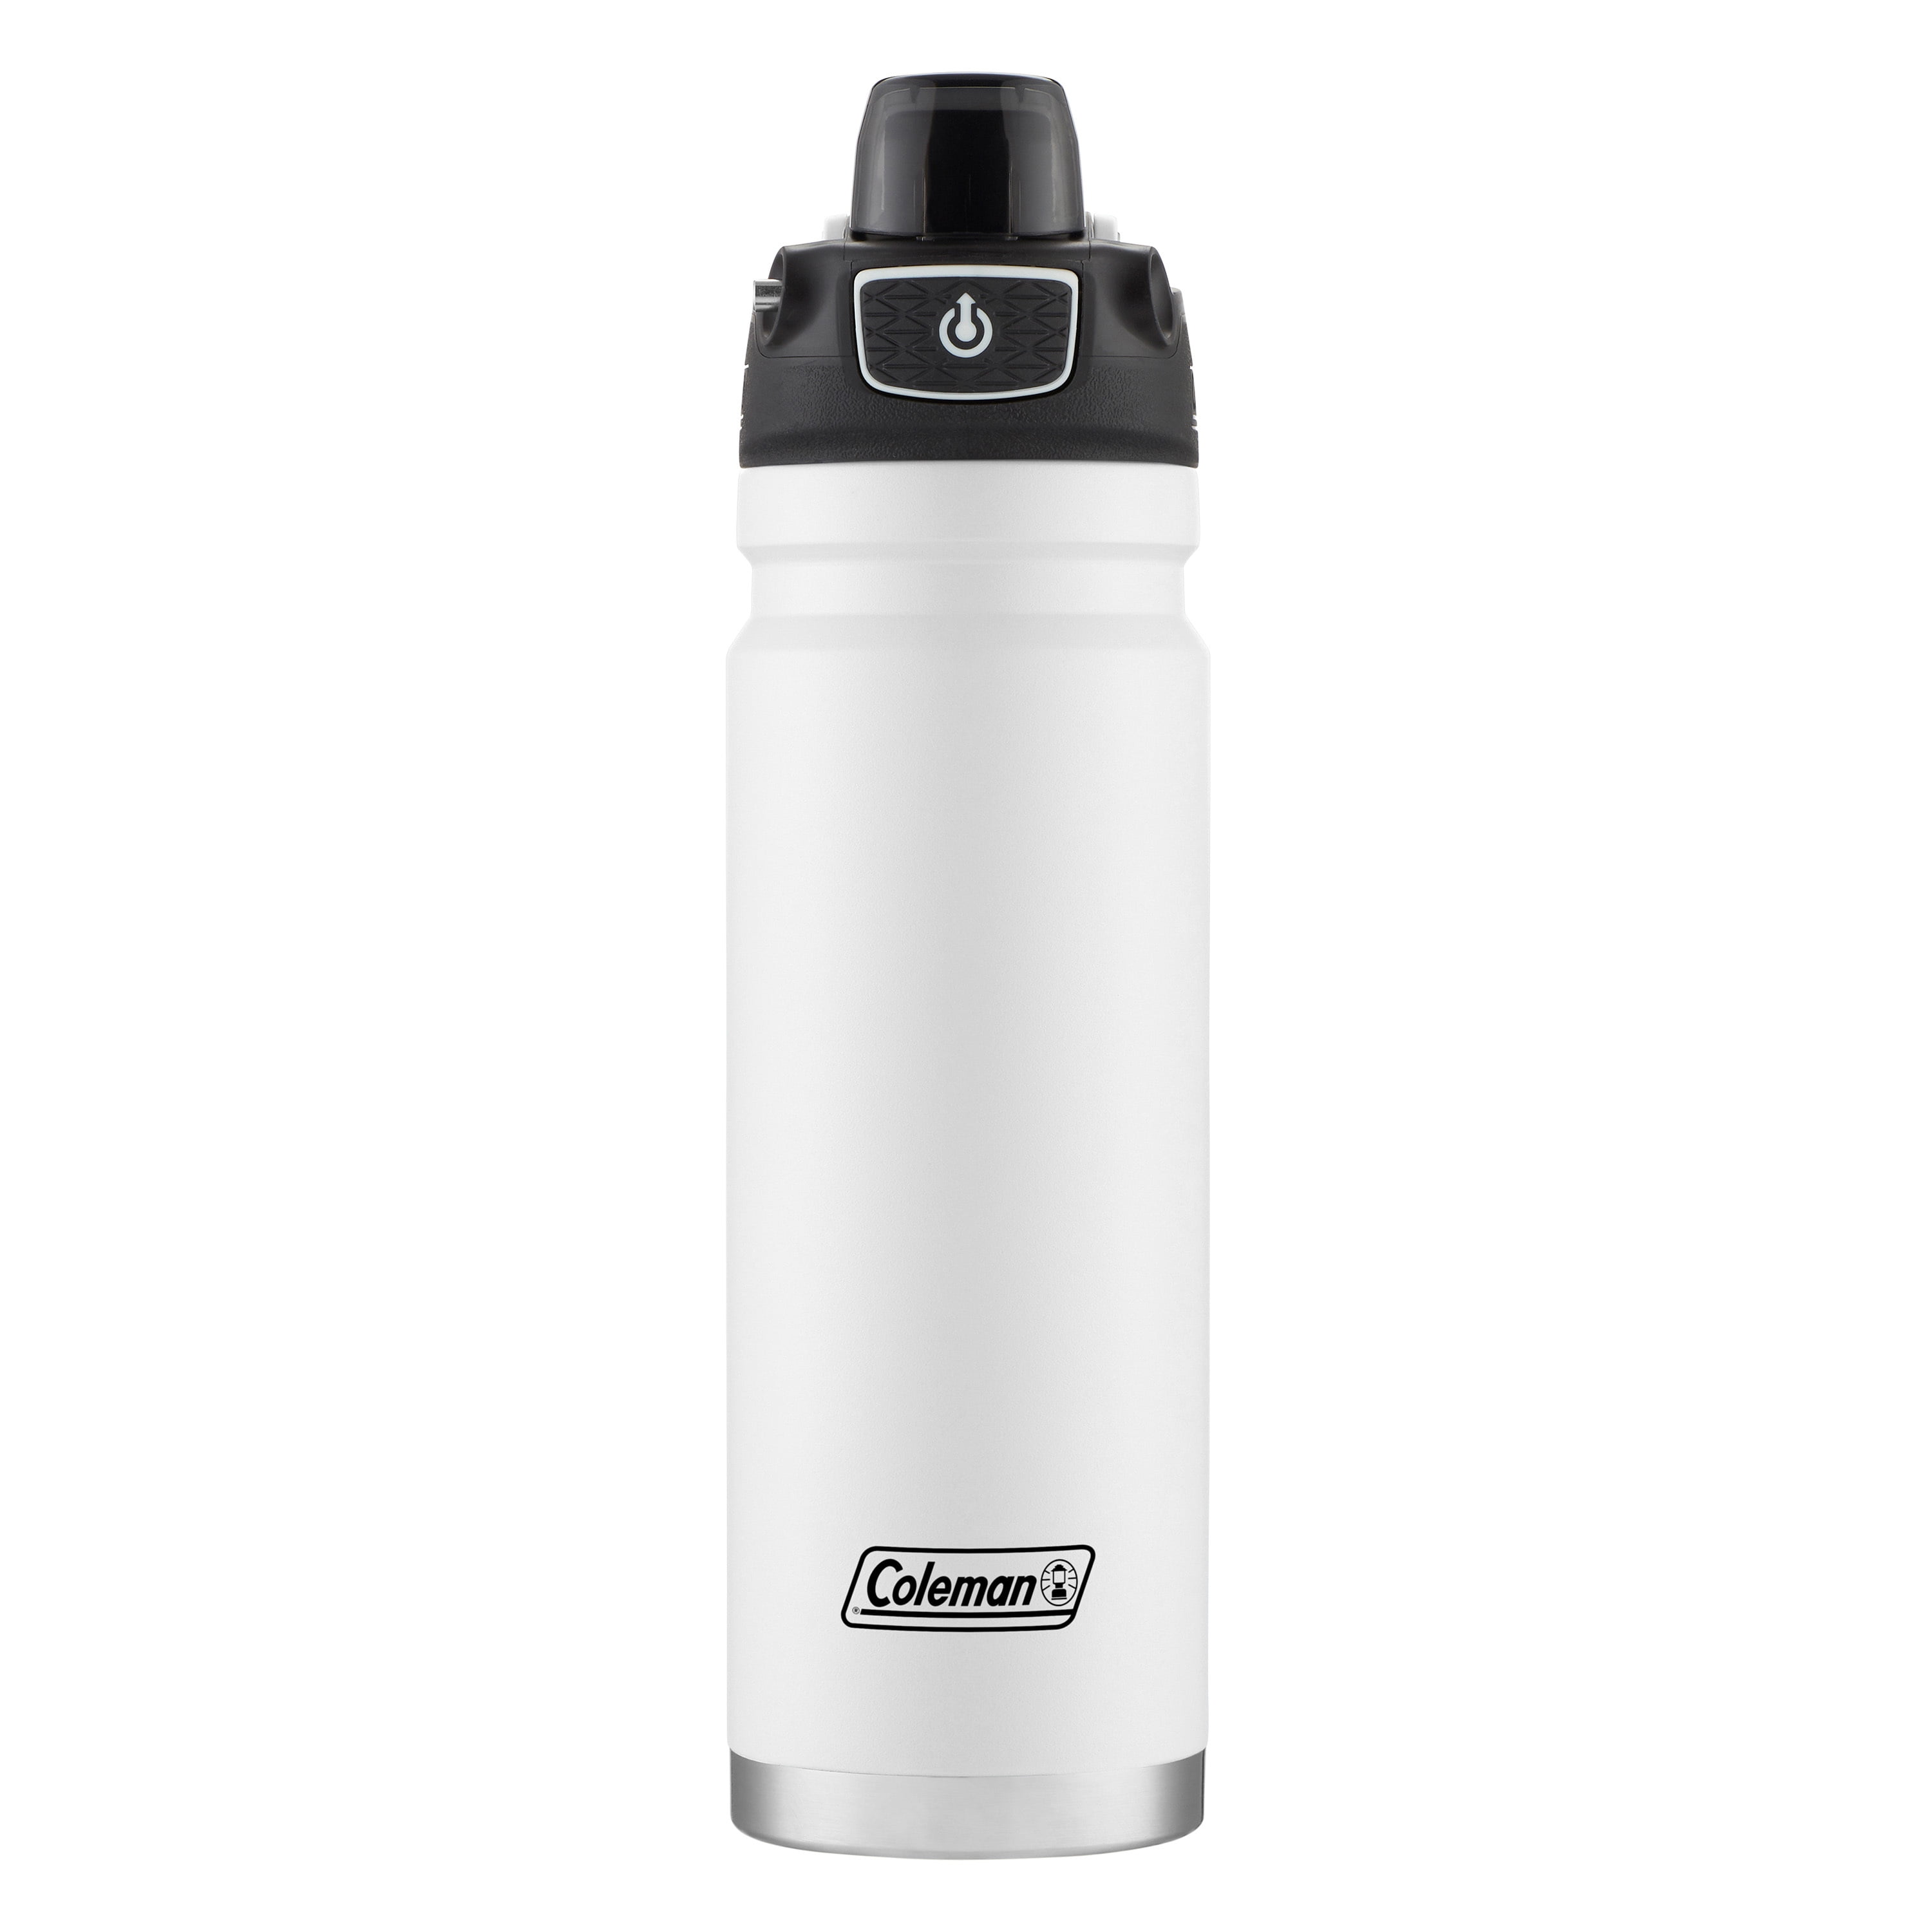 Coleman 24 oz. Black Autoseal FreeFlow Stainless Steel Insulated